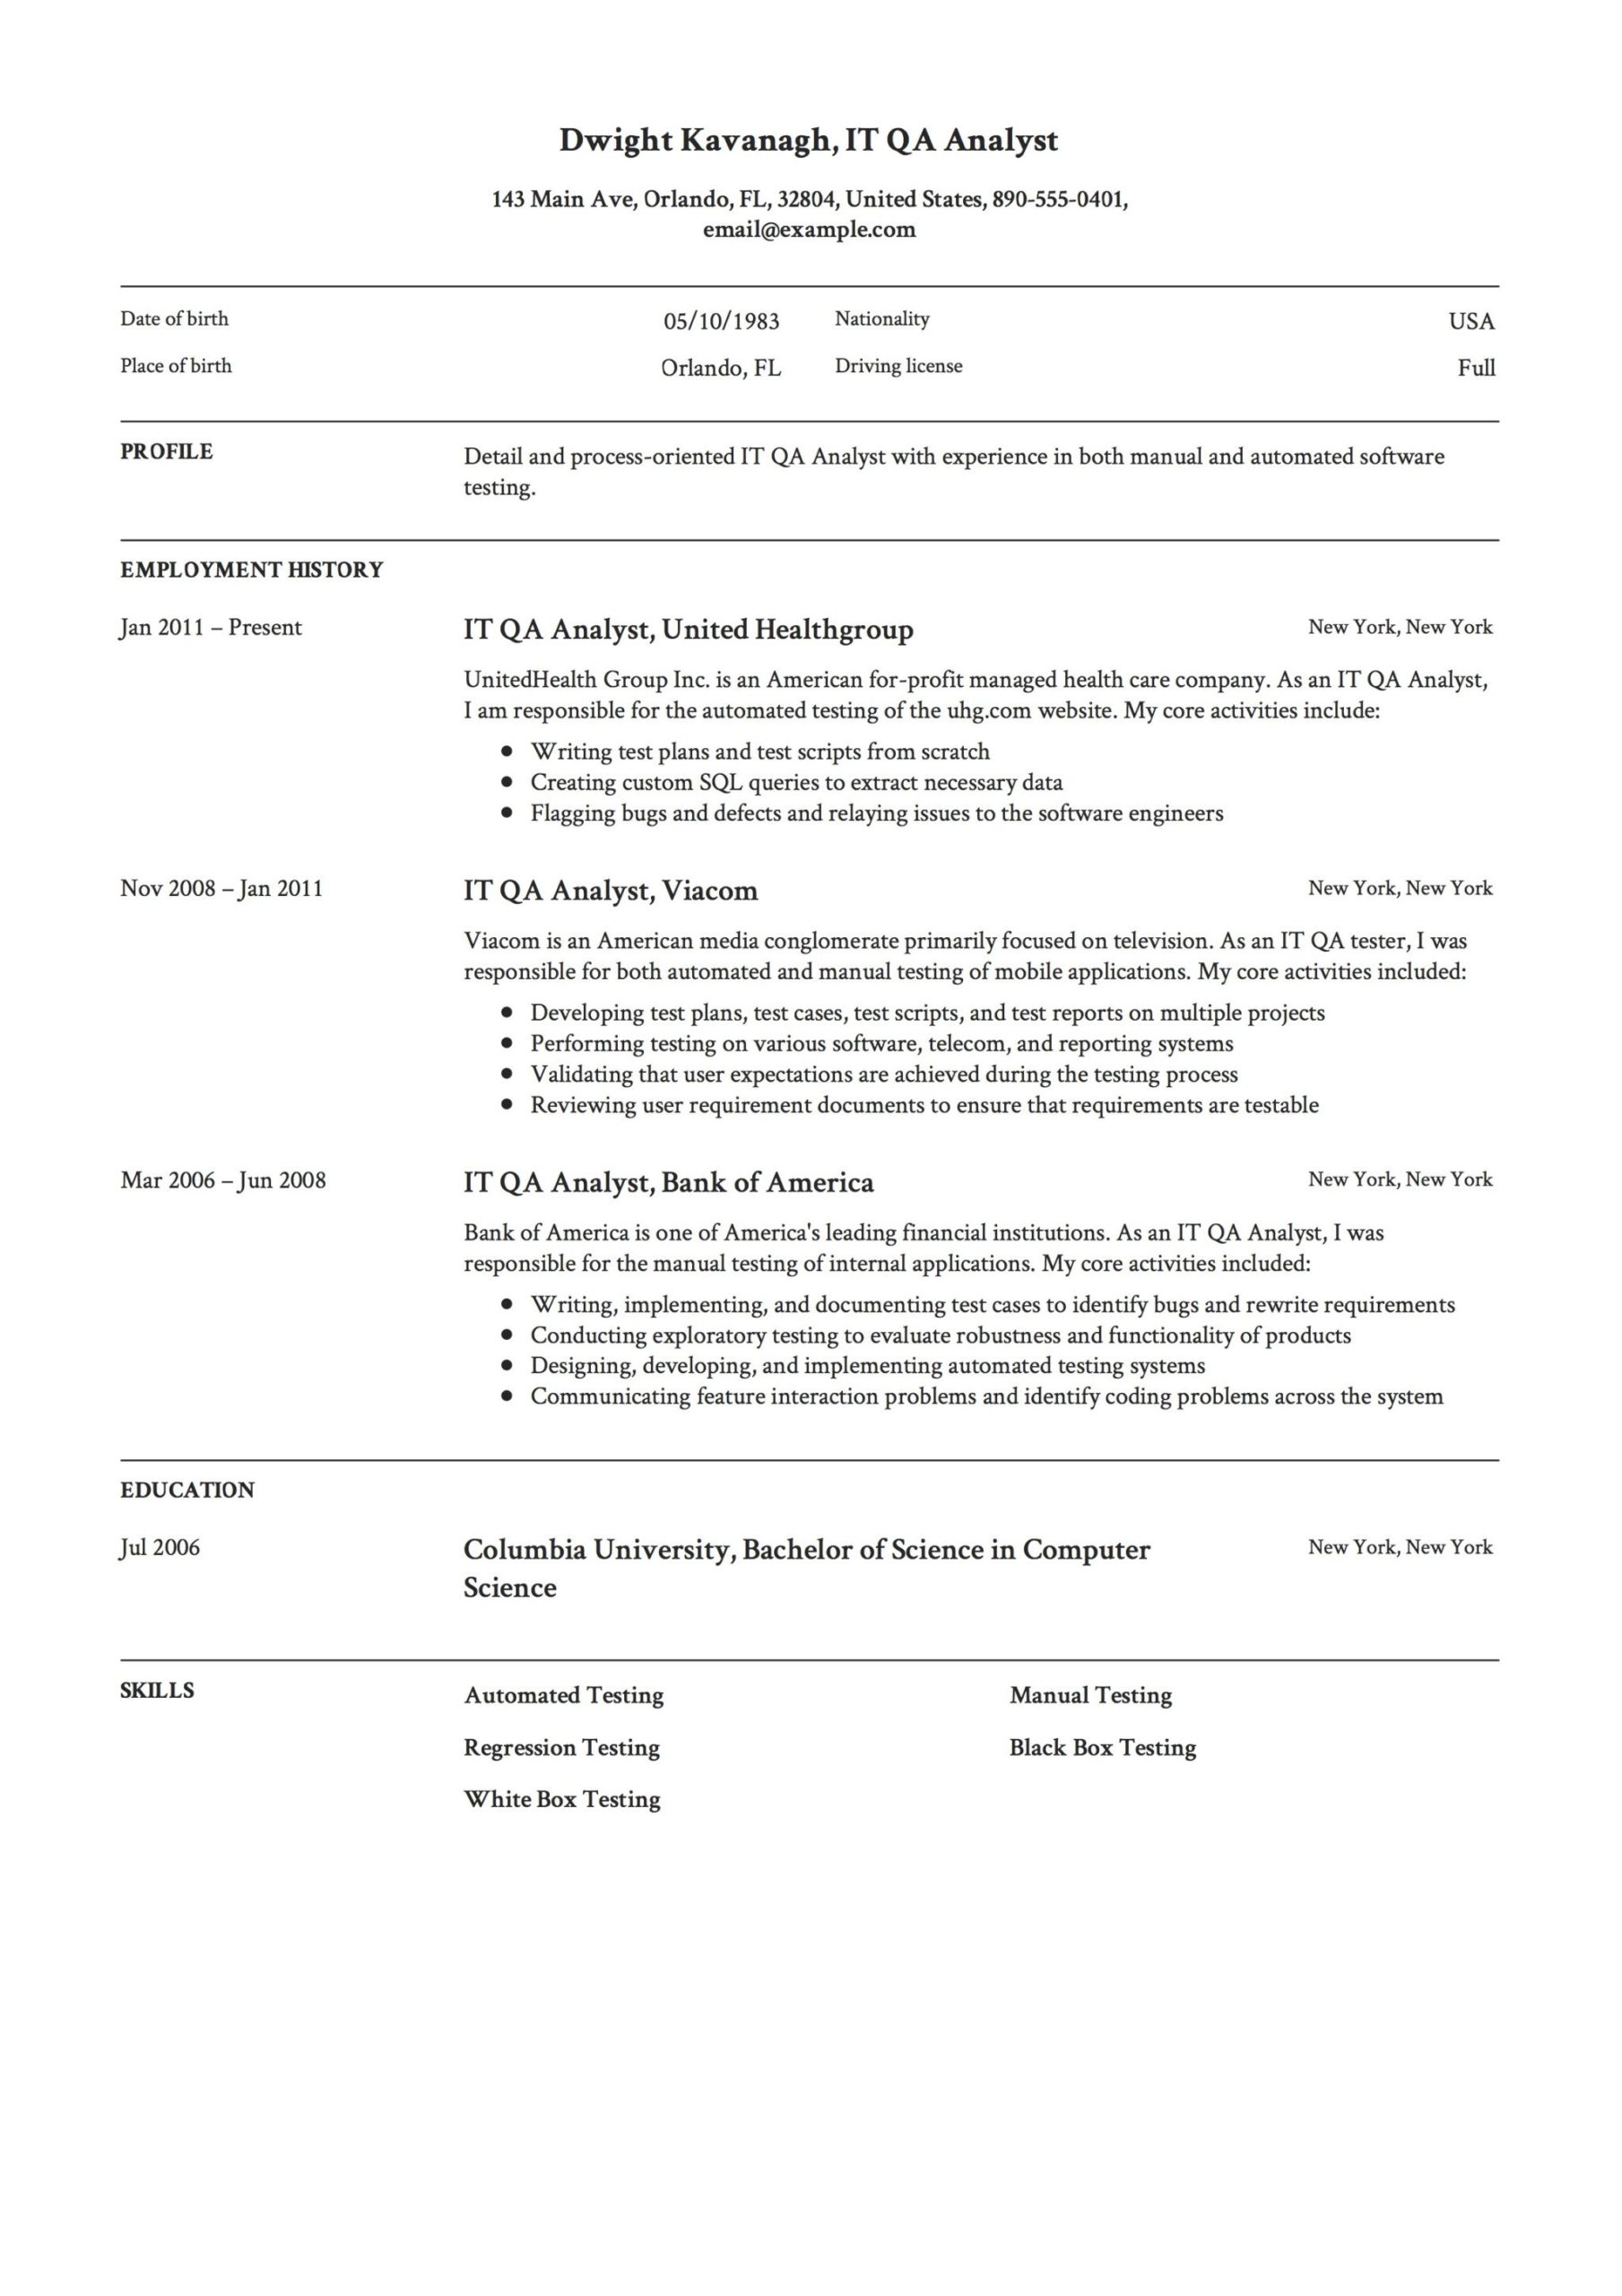 Sample Resumes for Qa Analyst 3 Years Experiene It Qa Analyst Resume & Guide 14 Templates Free